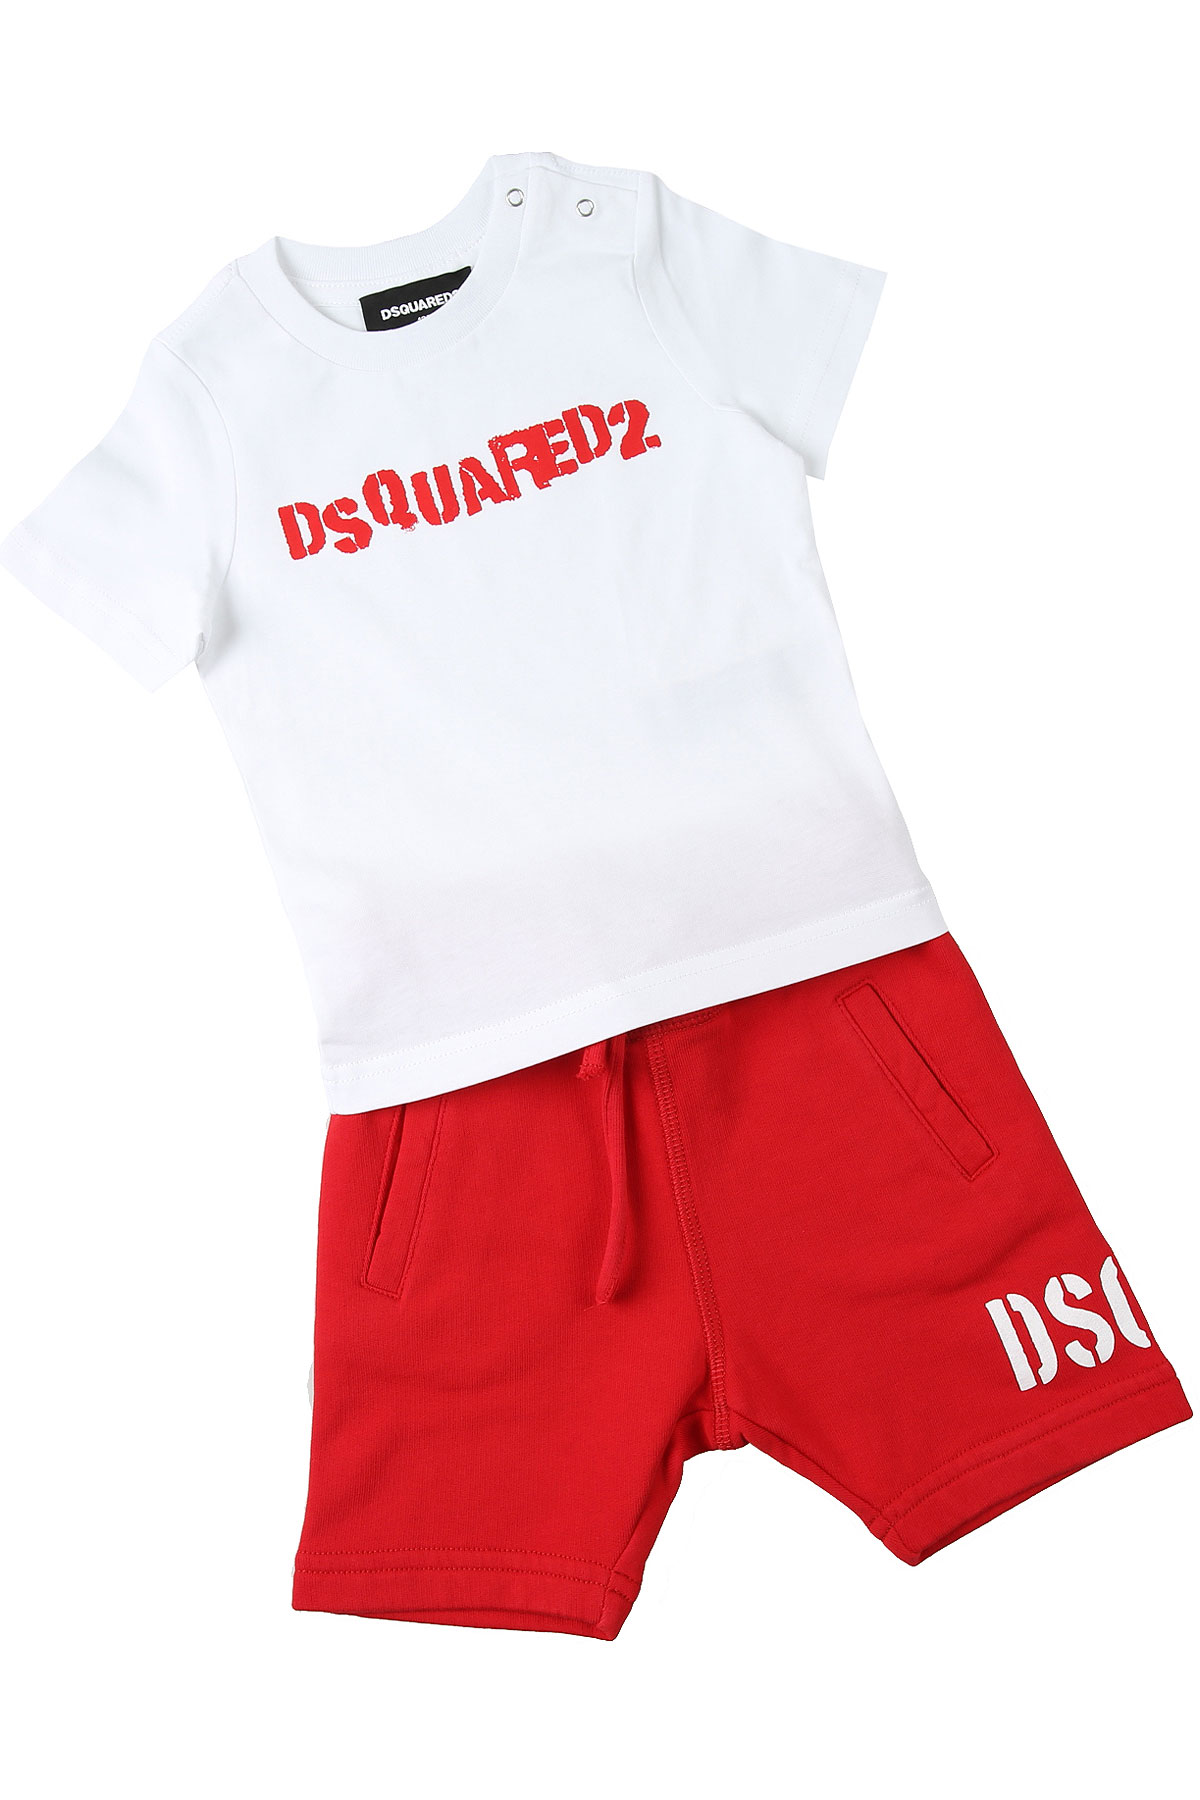 Baby Boy Clothing Dsquared2, Style code 